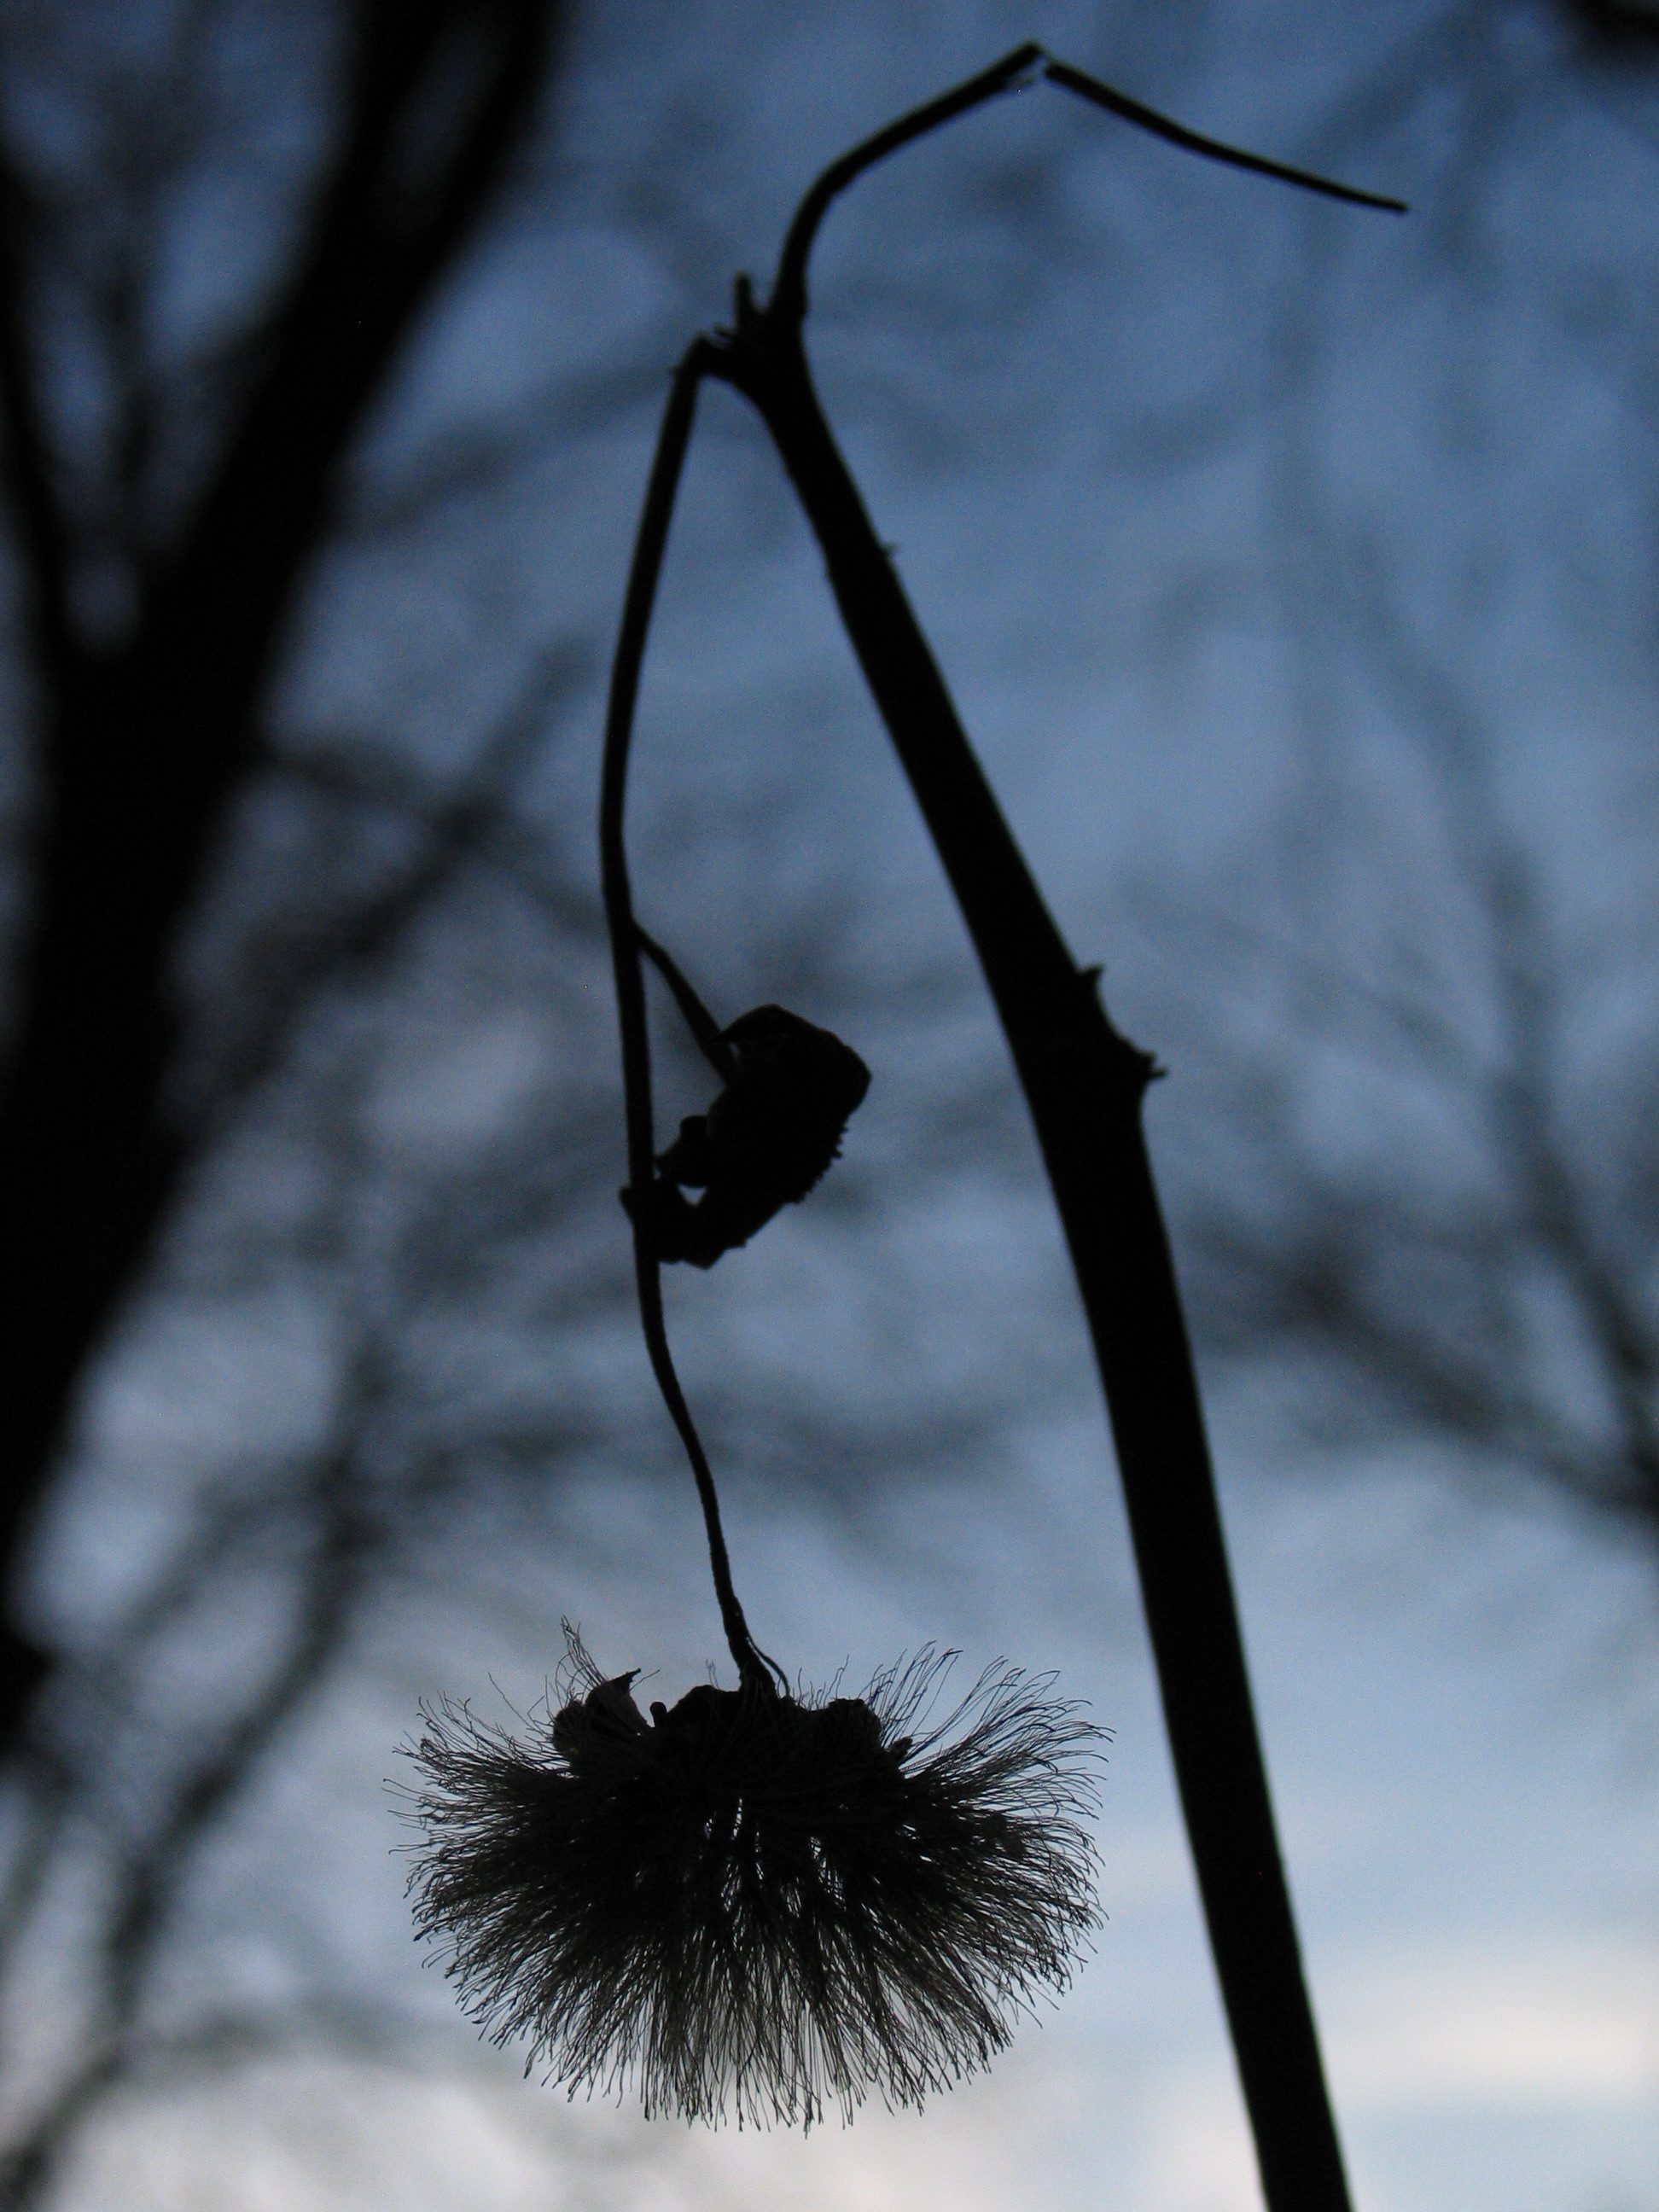 A silhouette of a thistle-like flower